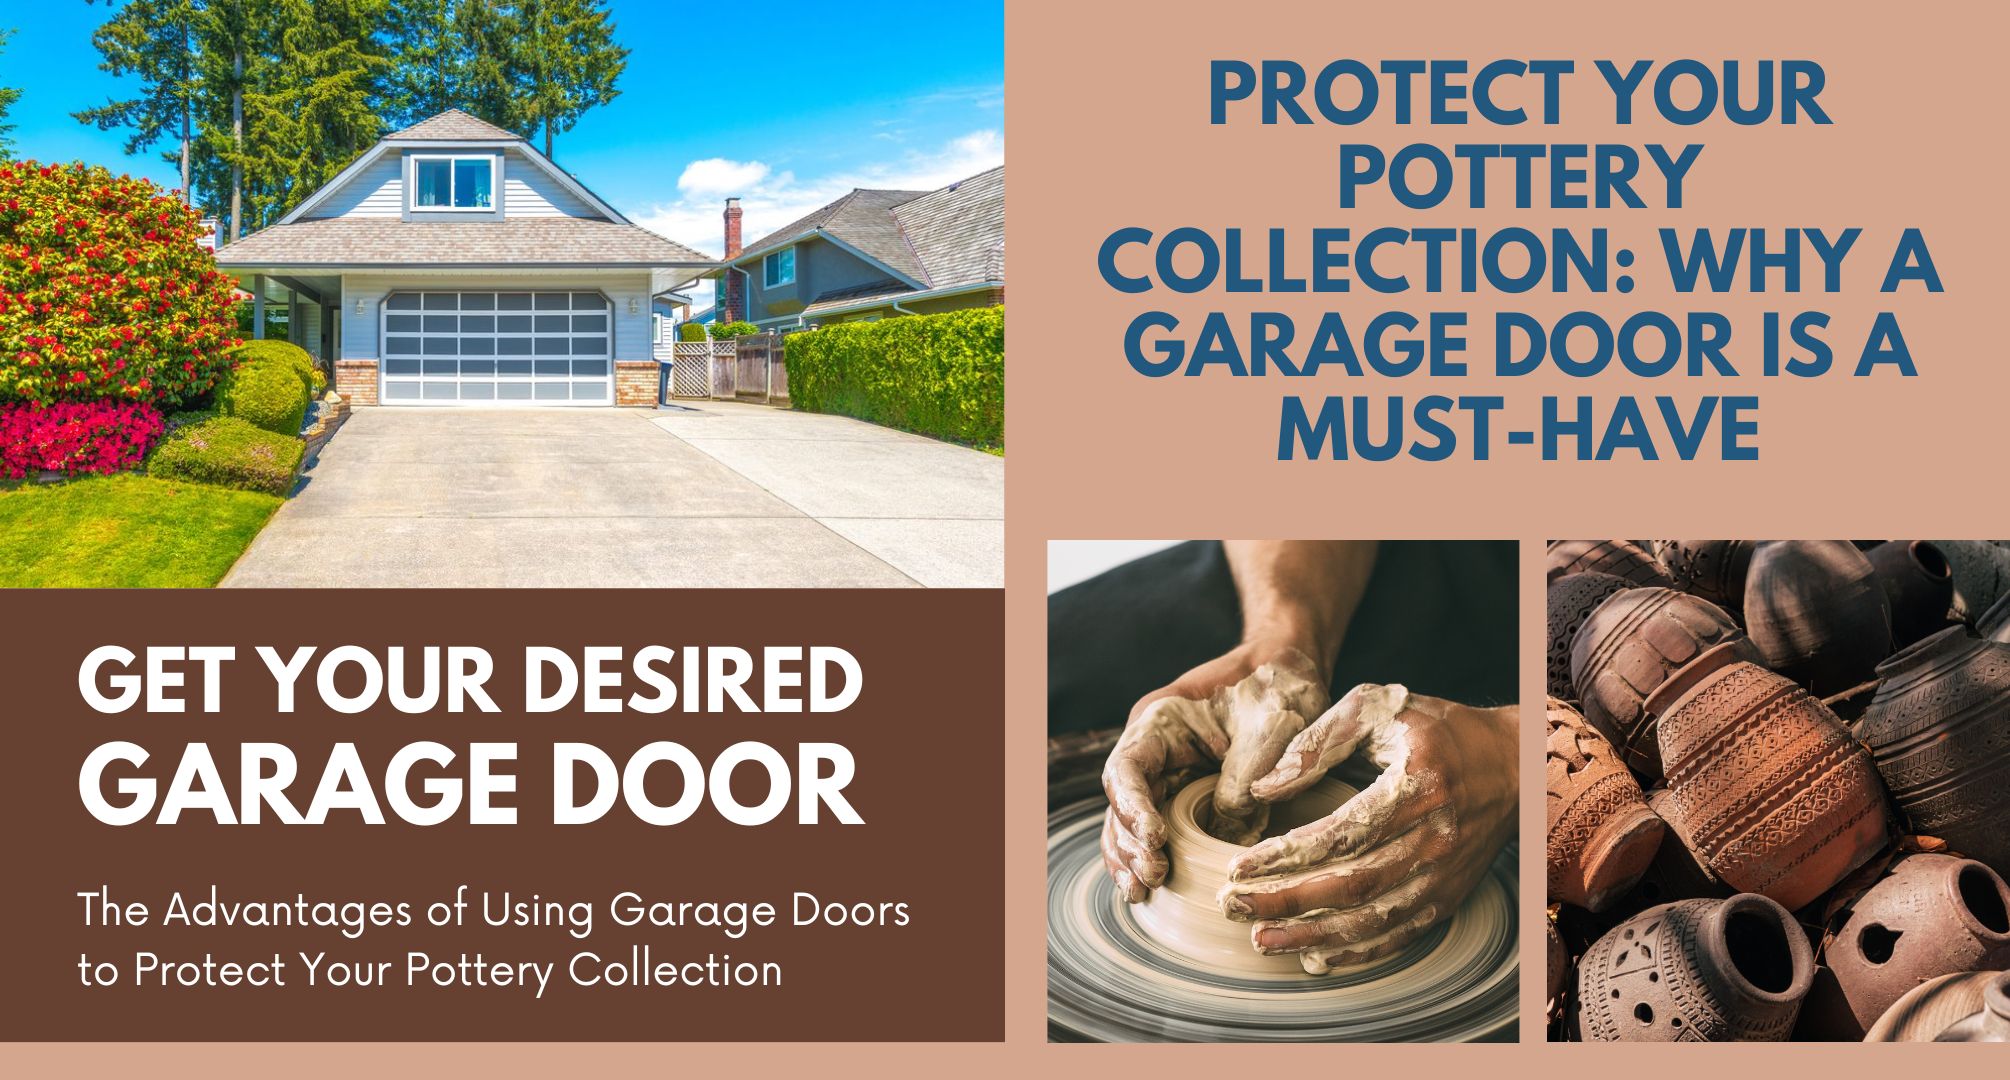 Protect Your Pottery Collection: Why a Garage Door is a Must-Have